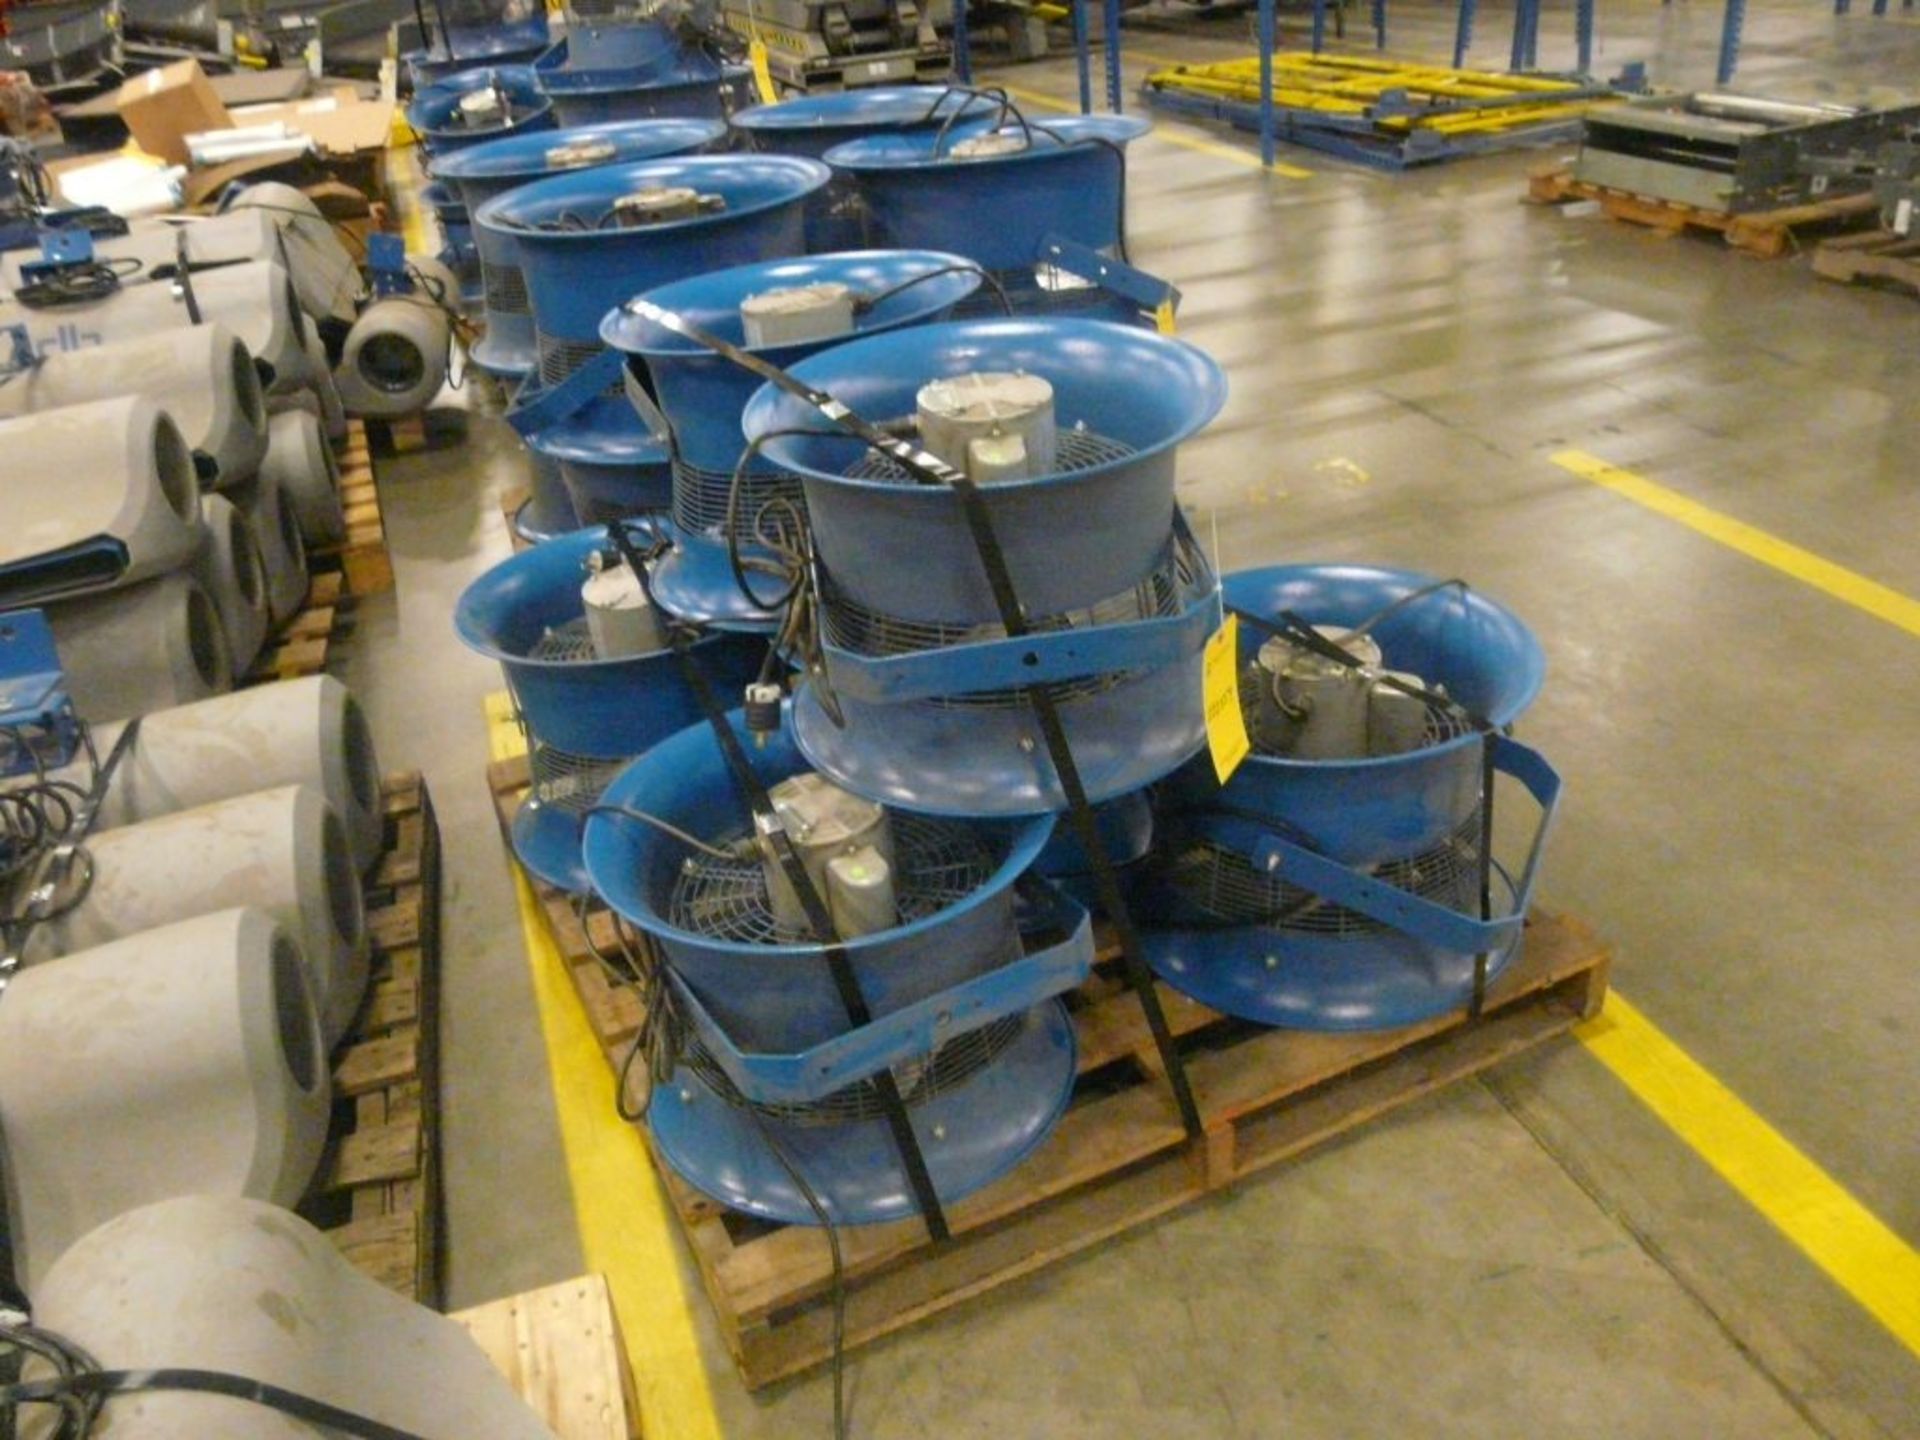 Lot of (7) Patterson 14" Circle Fans - Tag: 222559; Lot Loading Fee: $30 - Image 2 of 10